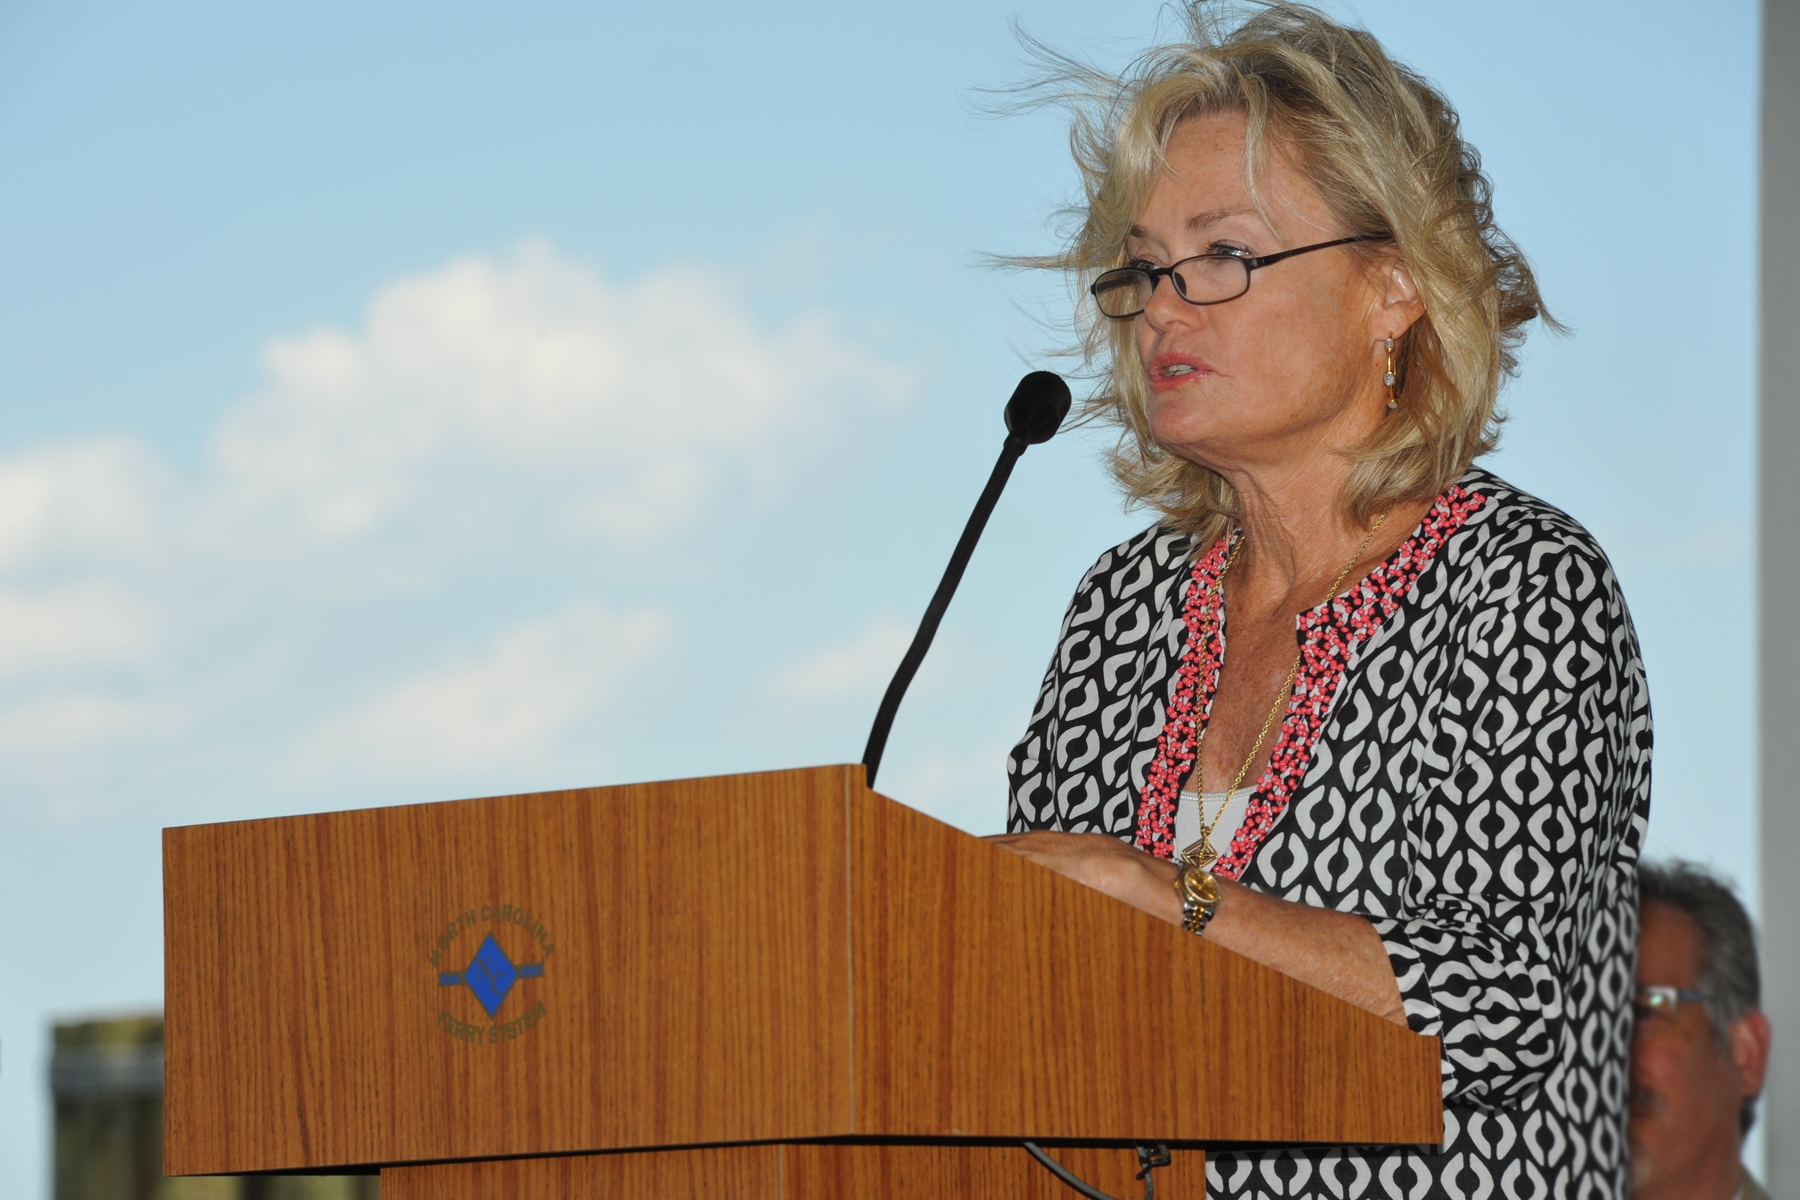 a woman speaking from a podium with a sky background